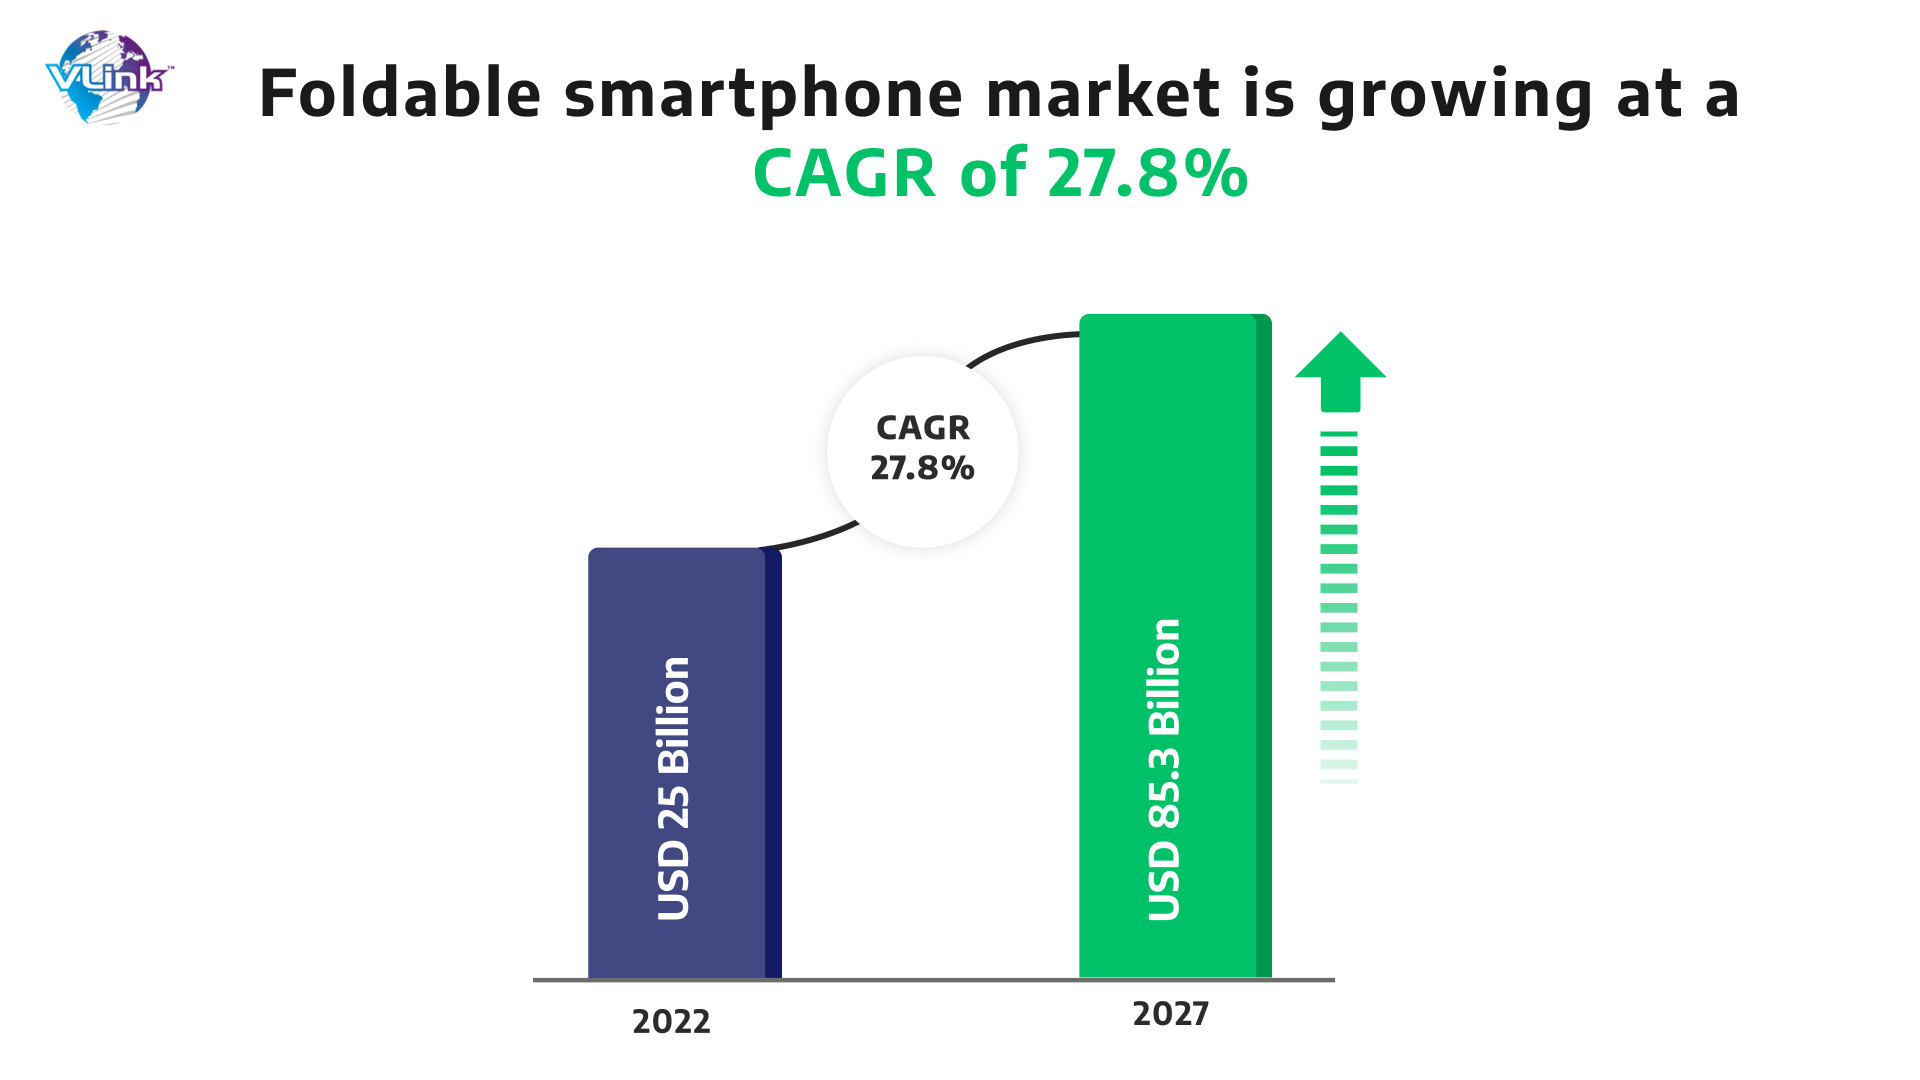 Foldable smartphone market is growing at a CAGR of 27.8%